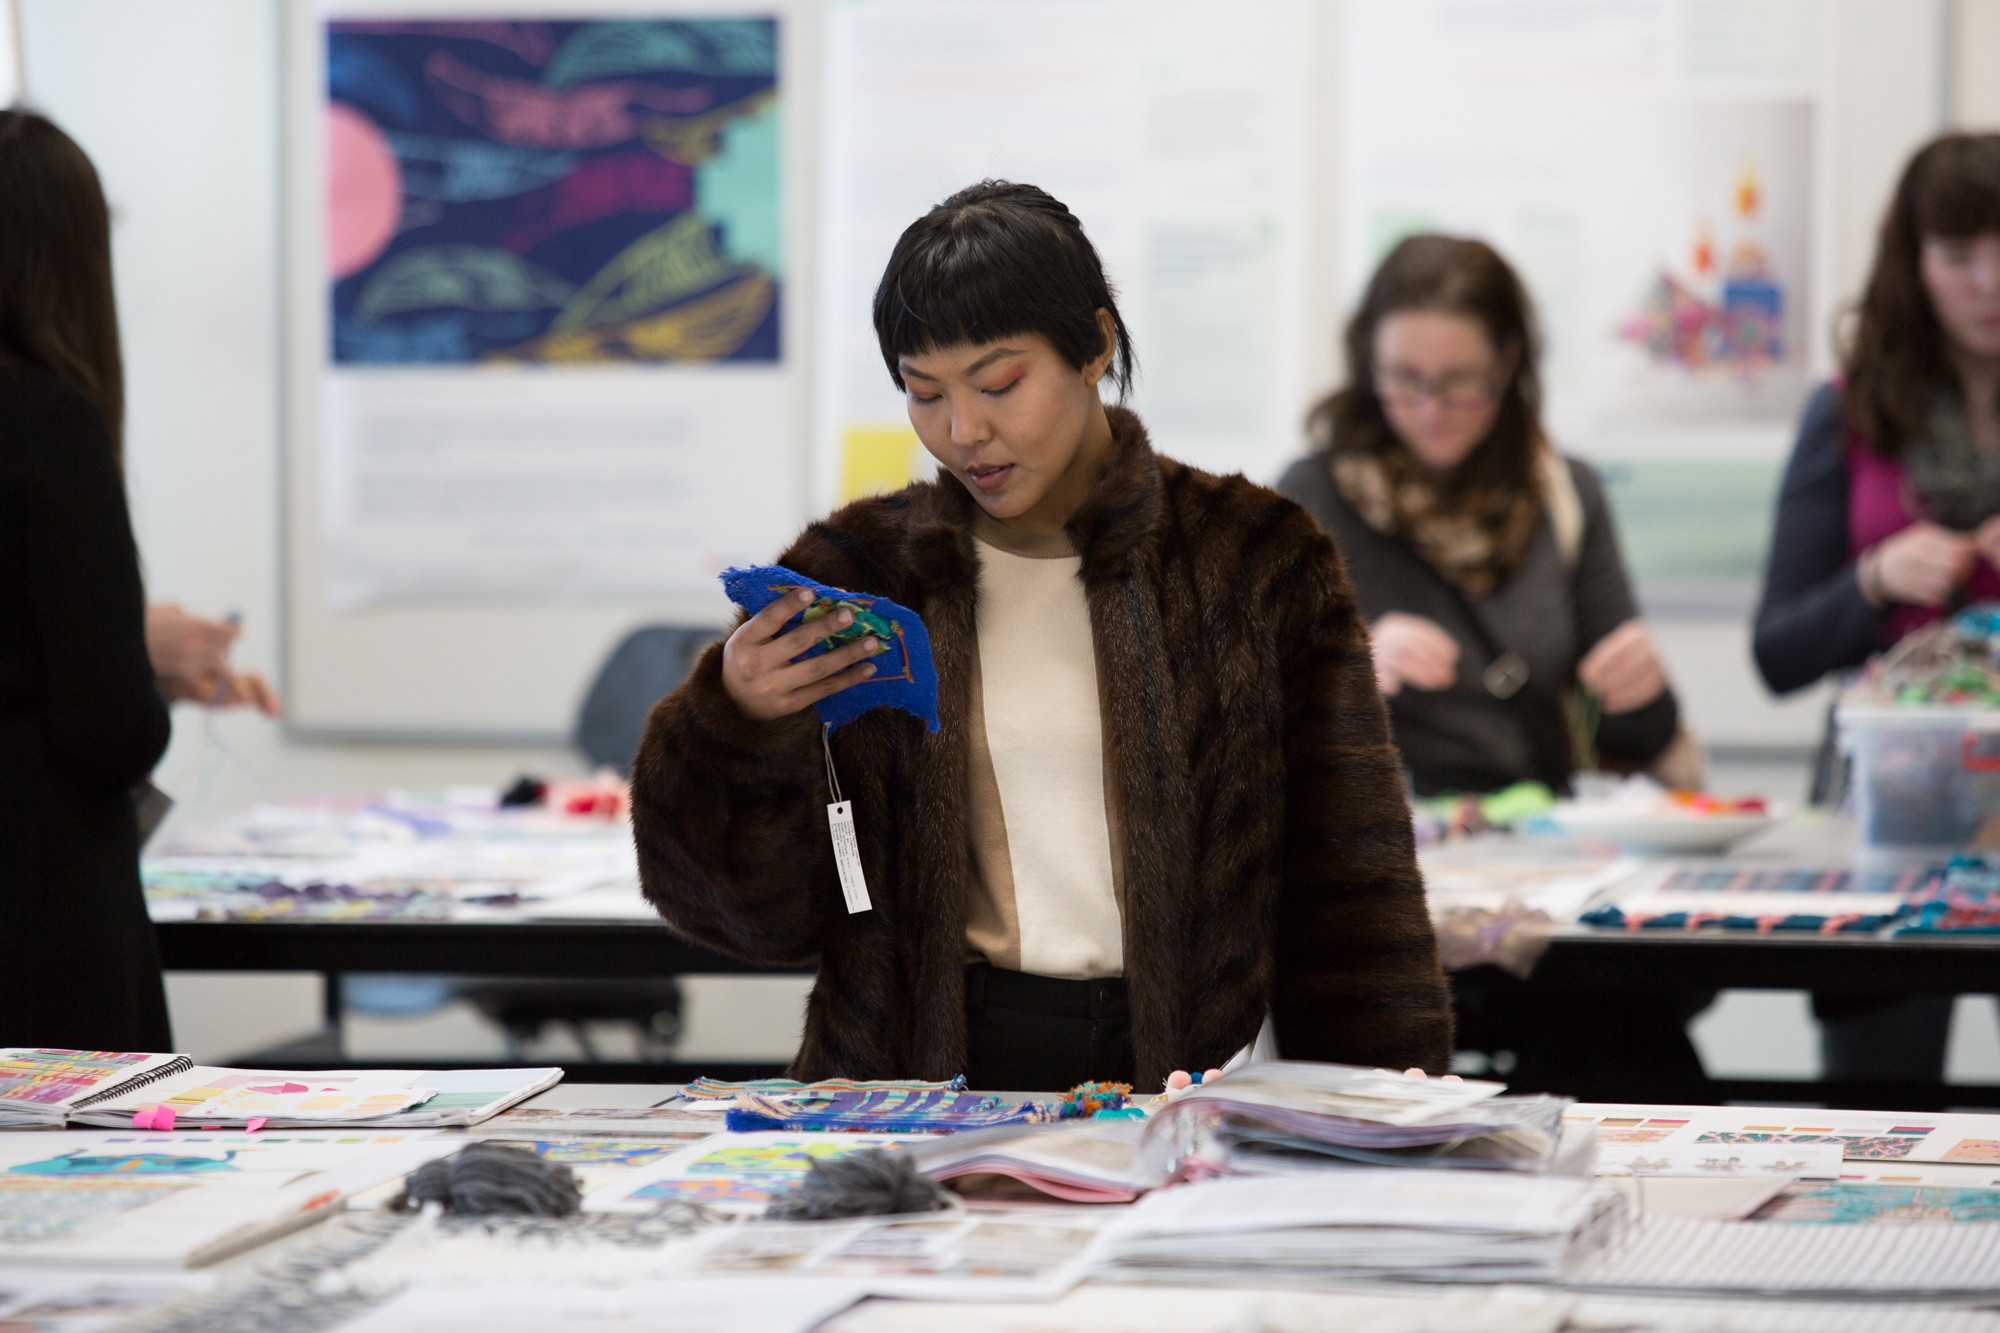 A woman wearing a fur jacket looking at fabric swatches.